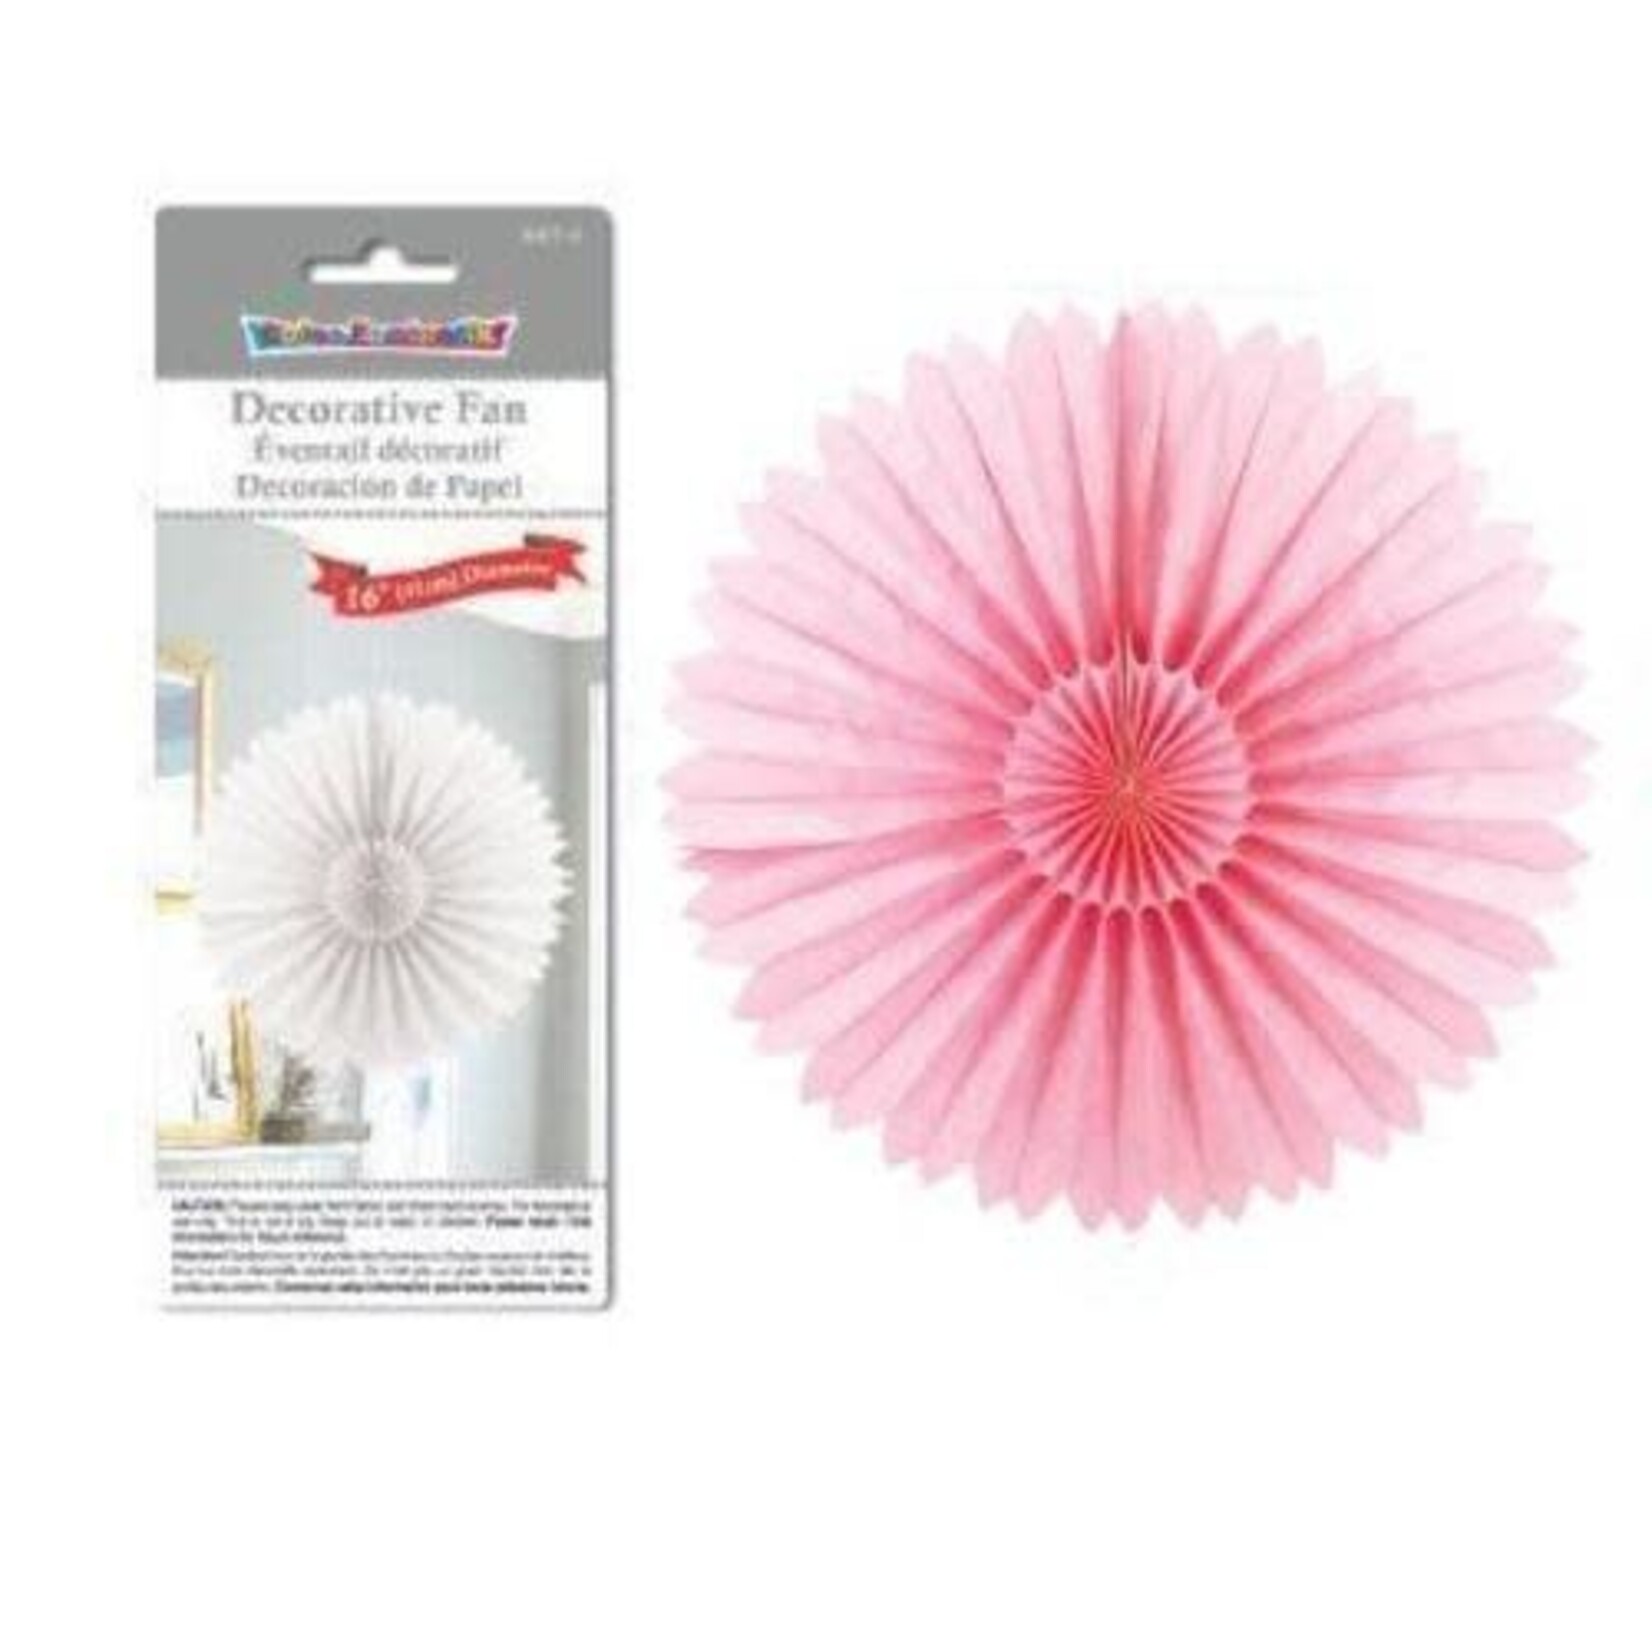 Decor Paper Tissue Fan 16 Inches Pastel Pink